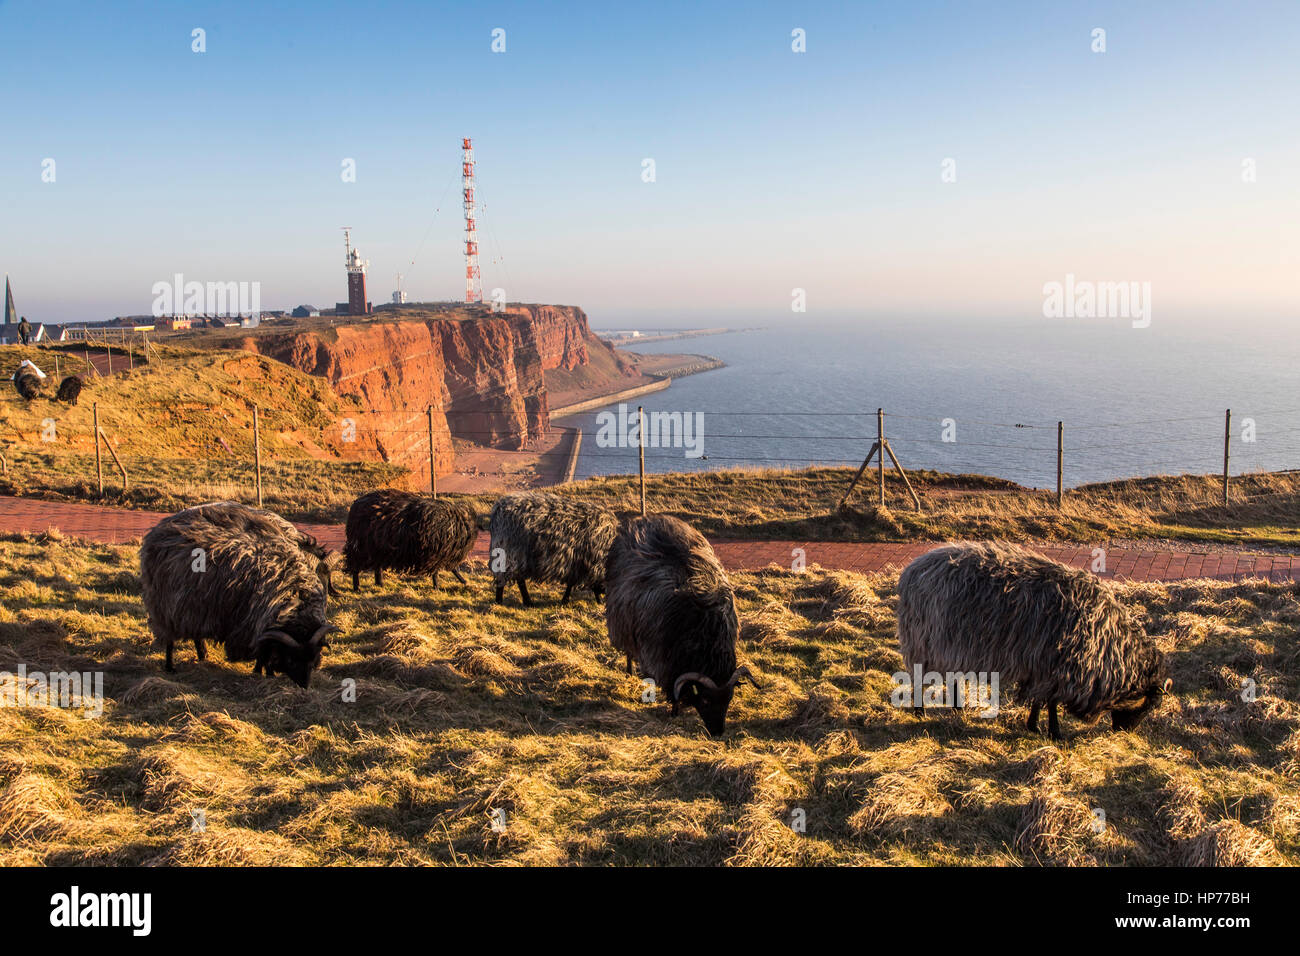 The red steep coast line of Helgoland, an German Island in the North Sea, lighthouse and radio-relay system antenna mast, flock of sheep, Stock Photo